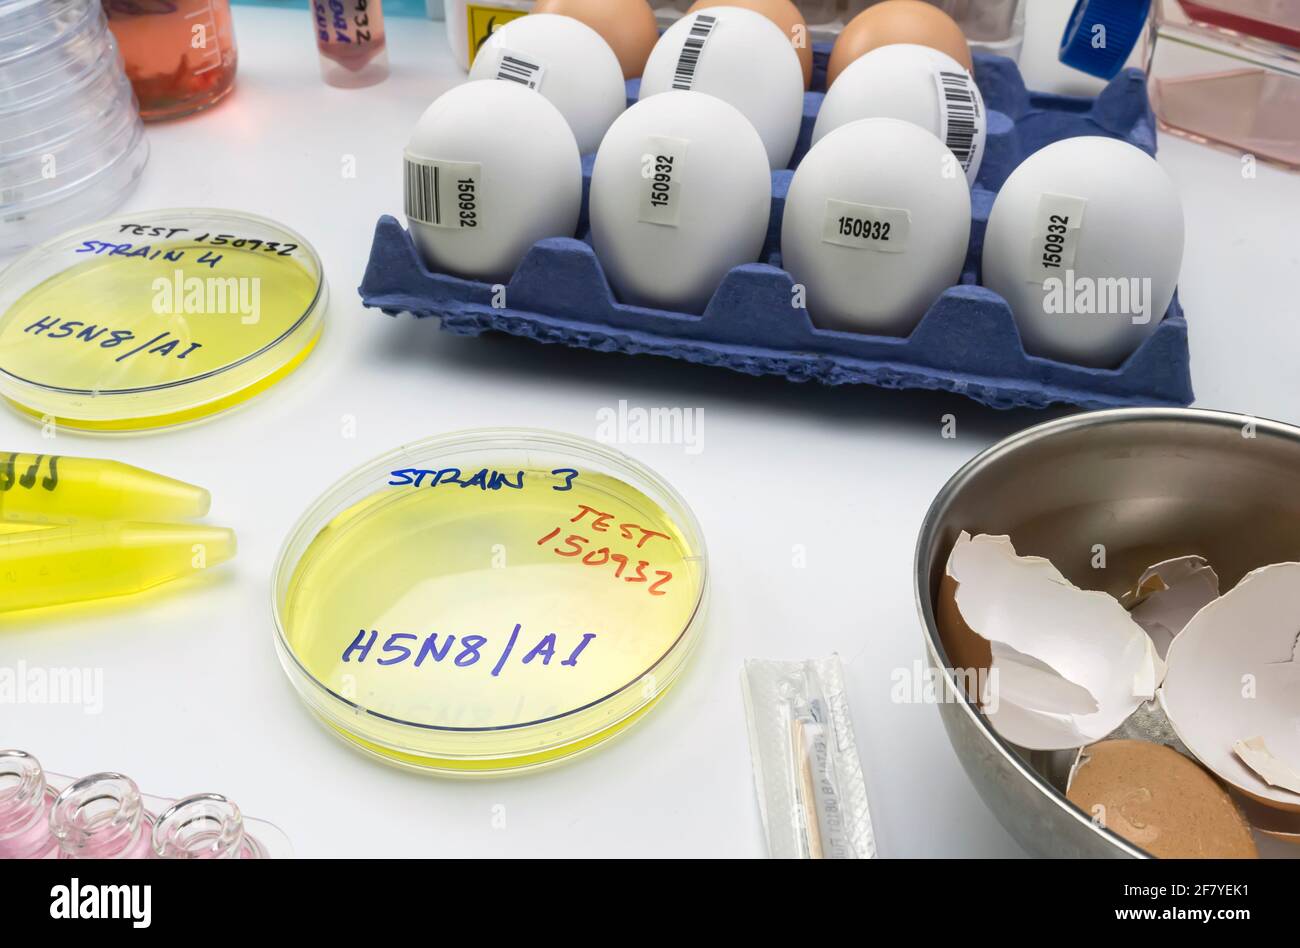 new strain of H5N8 avian influenza infected in humans, petri dish with samples, conceptual image Stock Photo